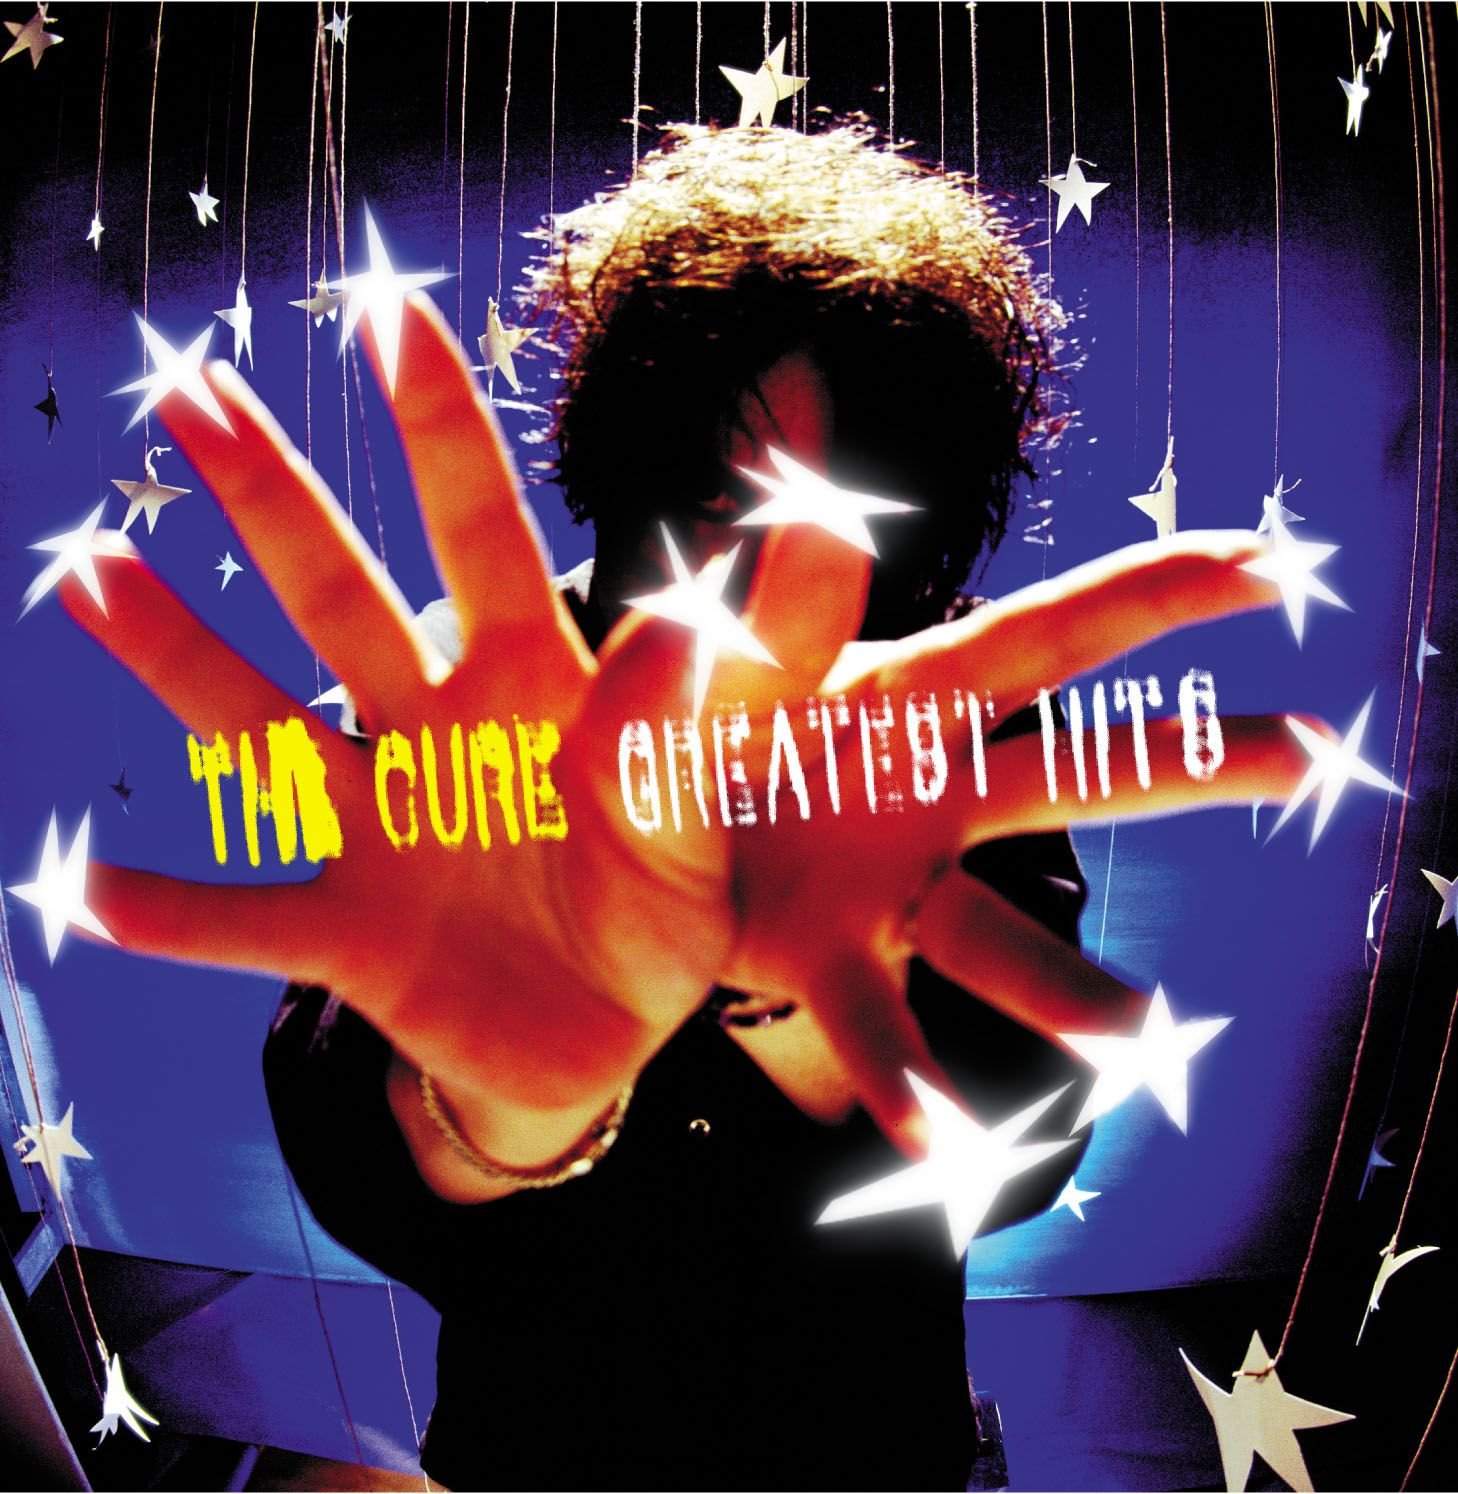 The Cure “Greatest Hits” CD 1